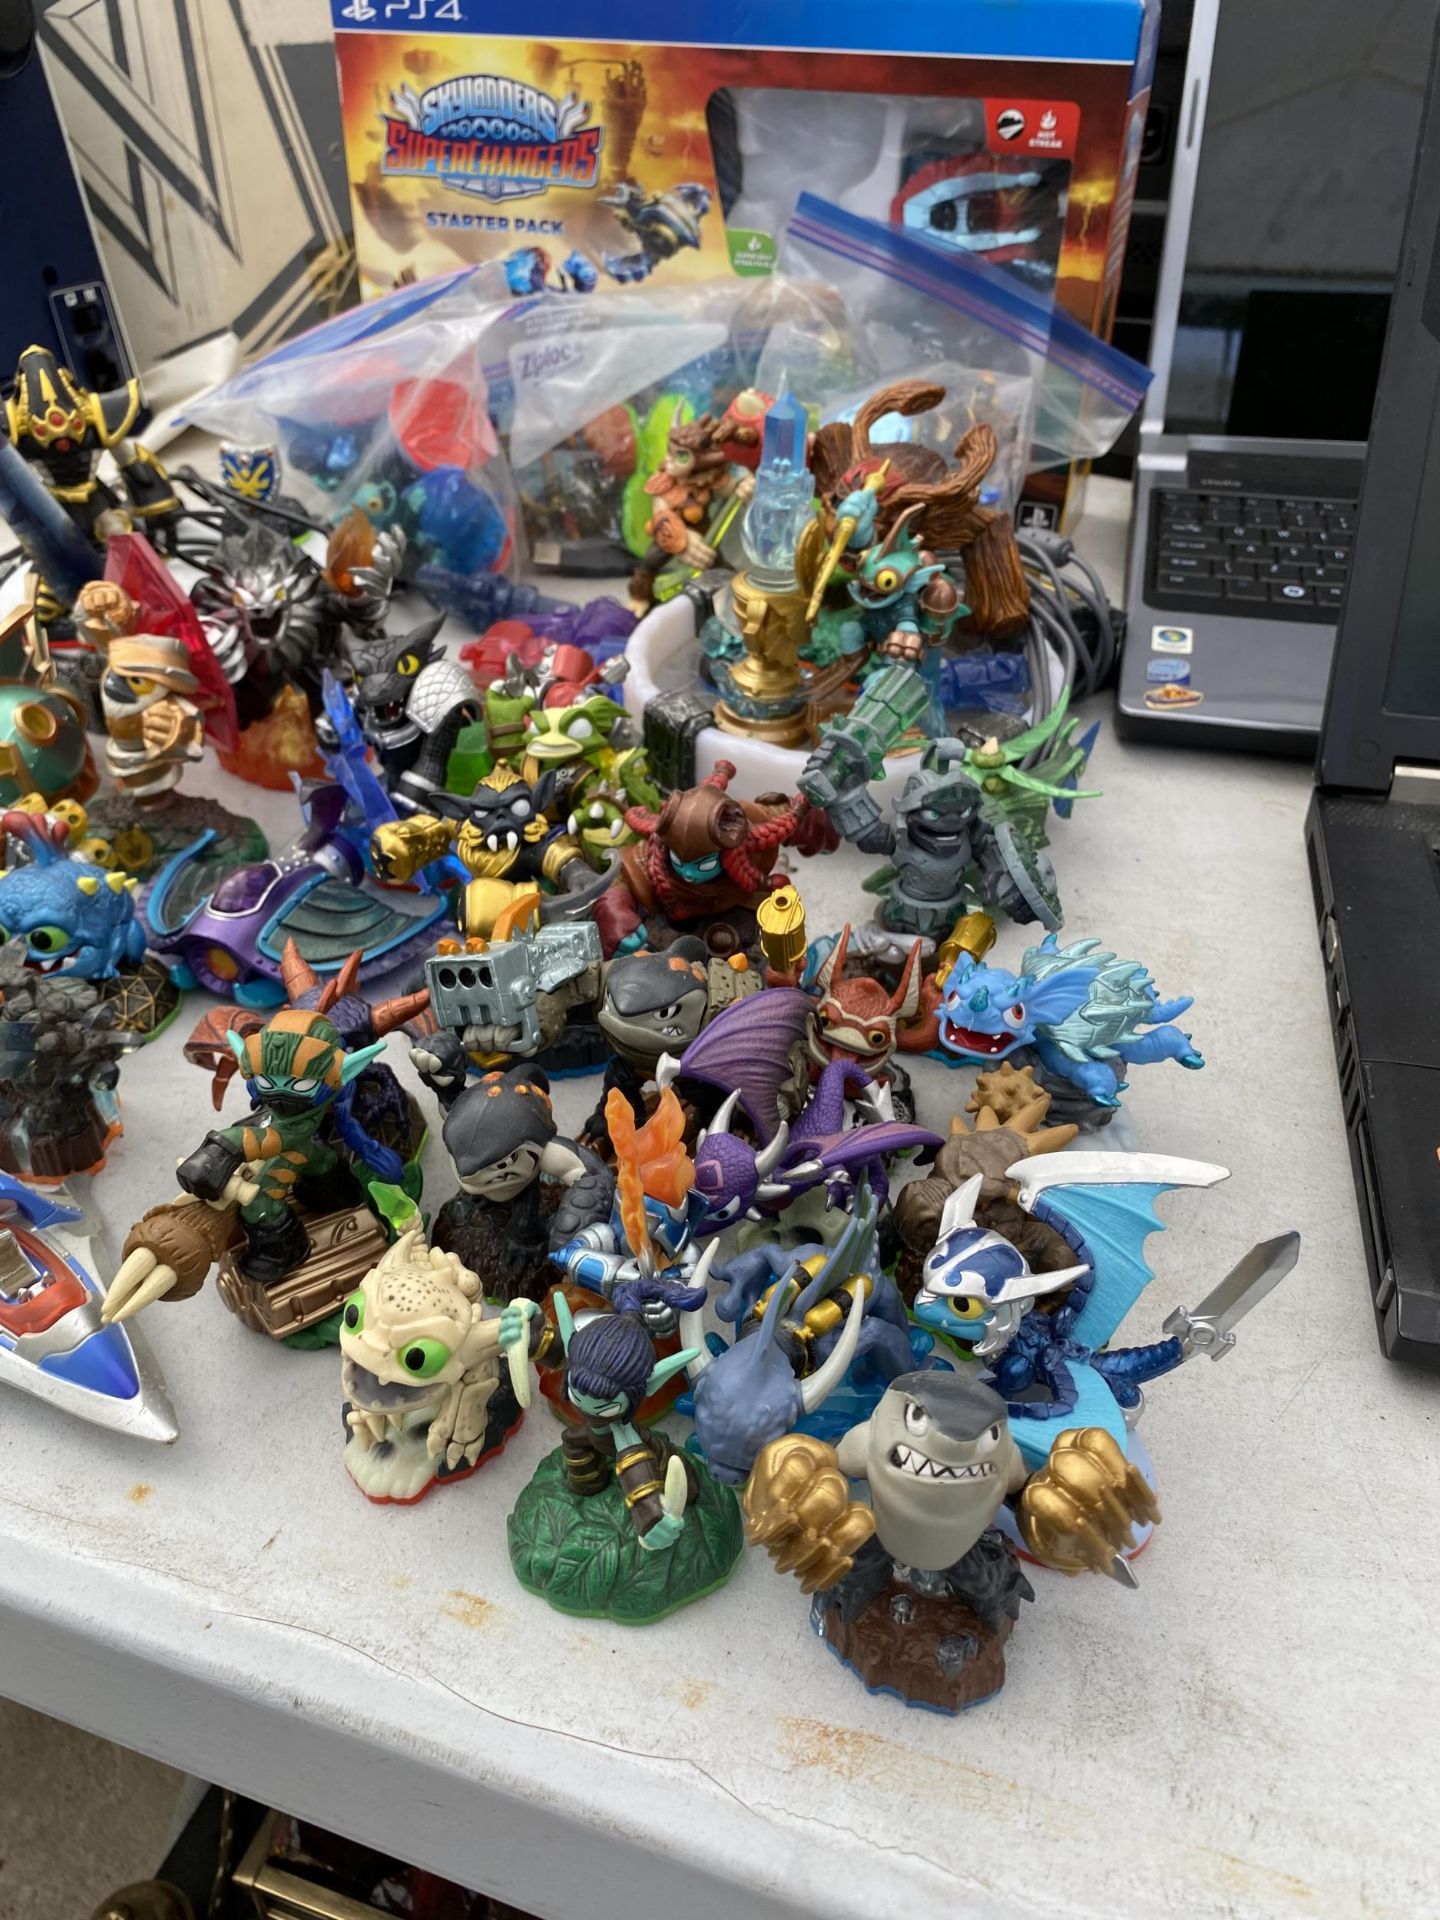 A LARGE COLLECTION OF PS4 SKYLANDERS FIGURES - Image 2 of 4